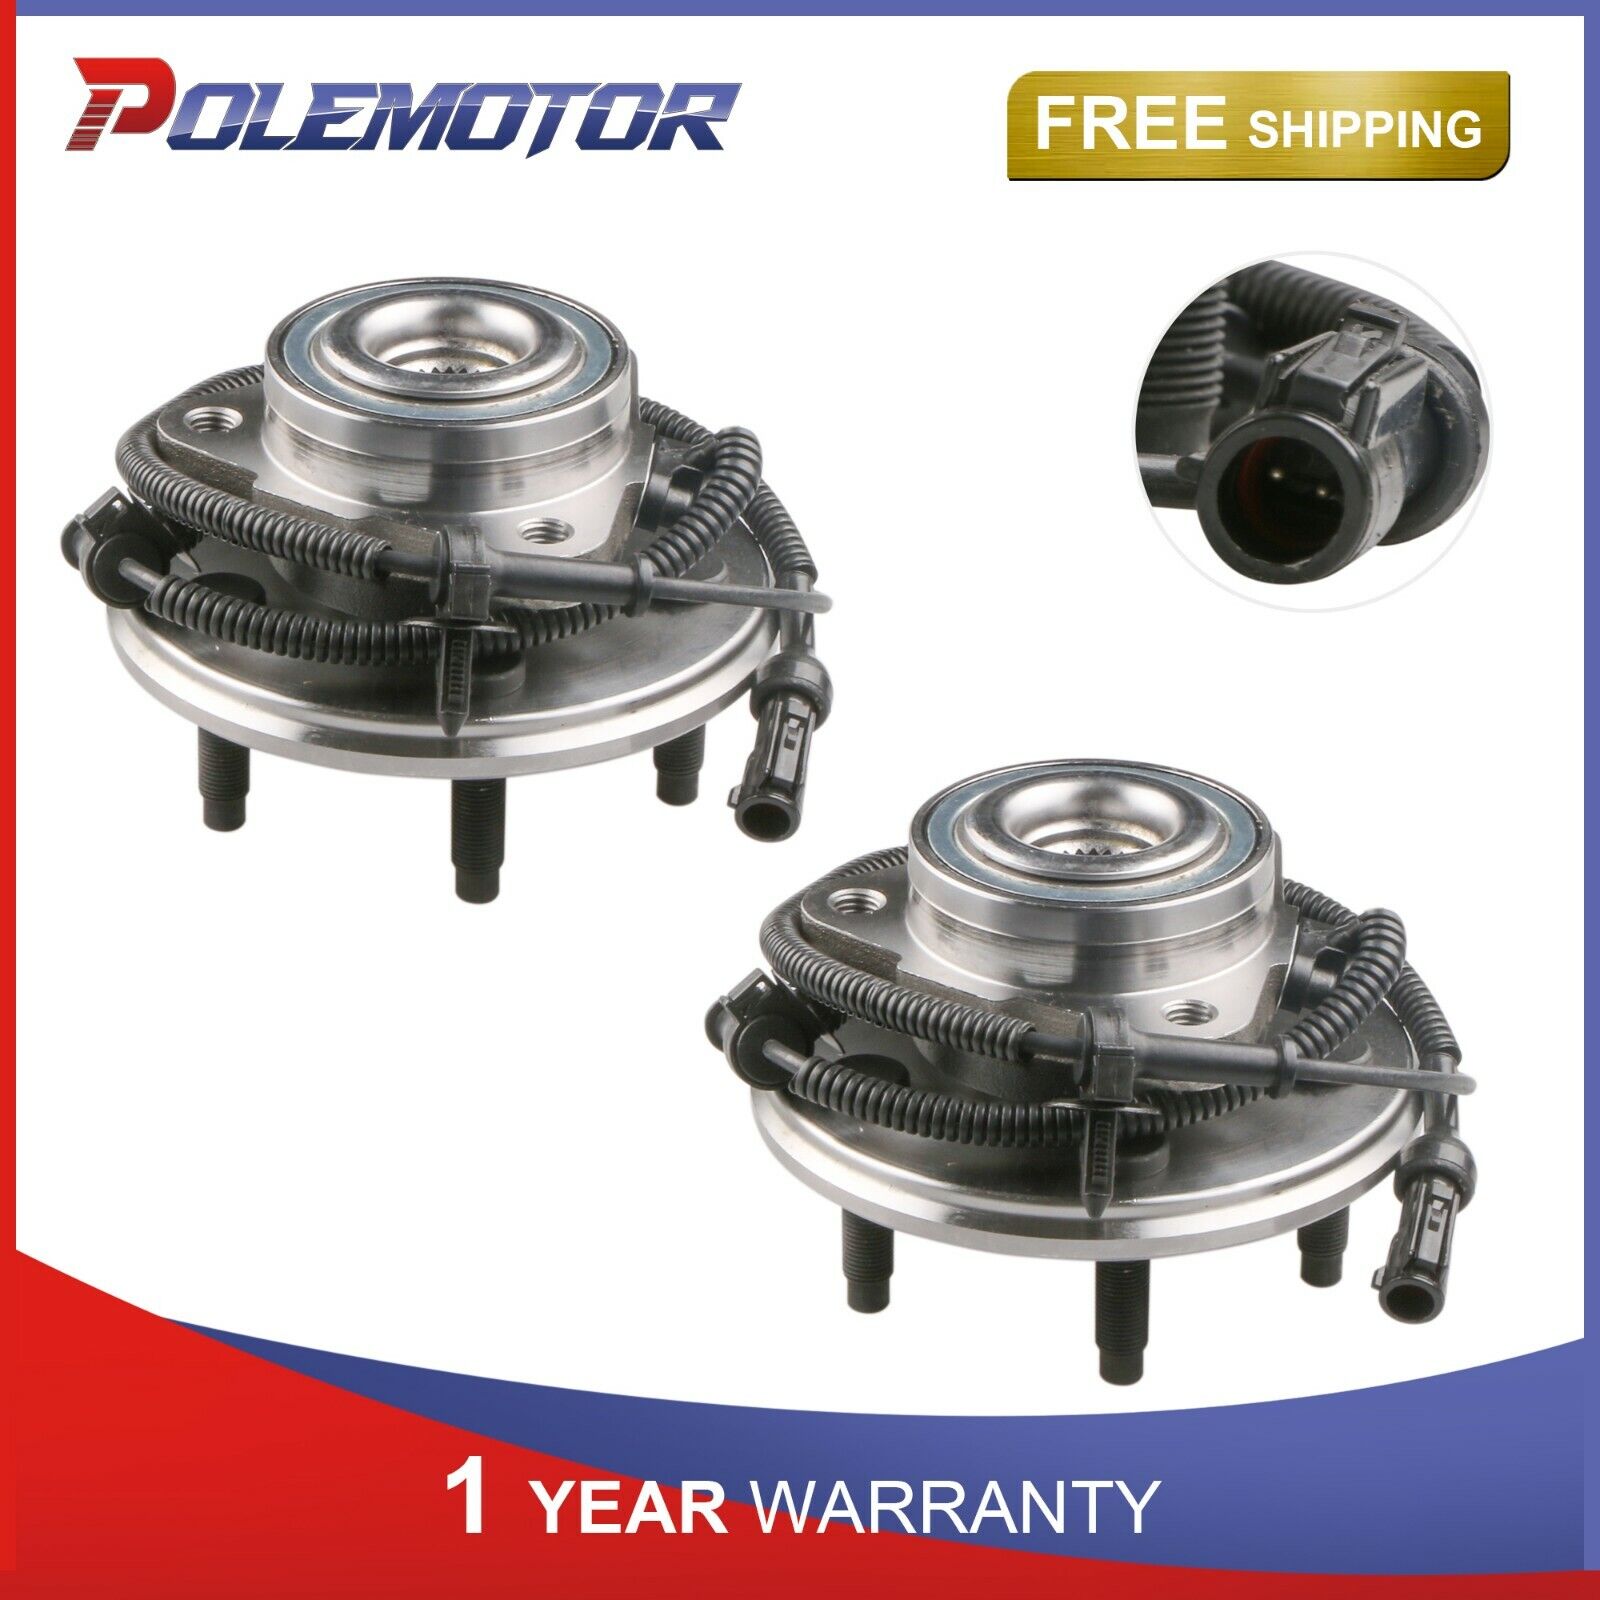 2PCS Front Wheel Hub Bearing Assembly For Ford Explorer Aviator Mountaineer